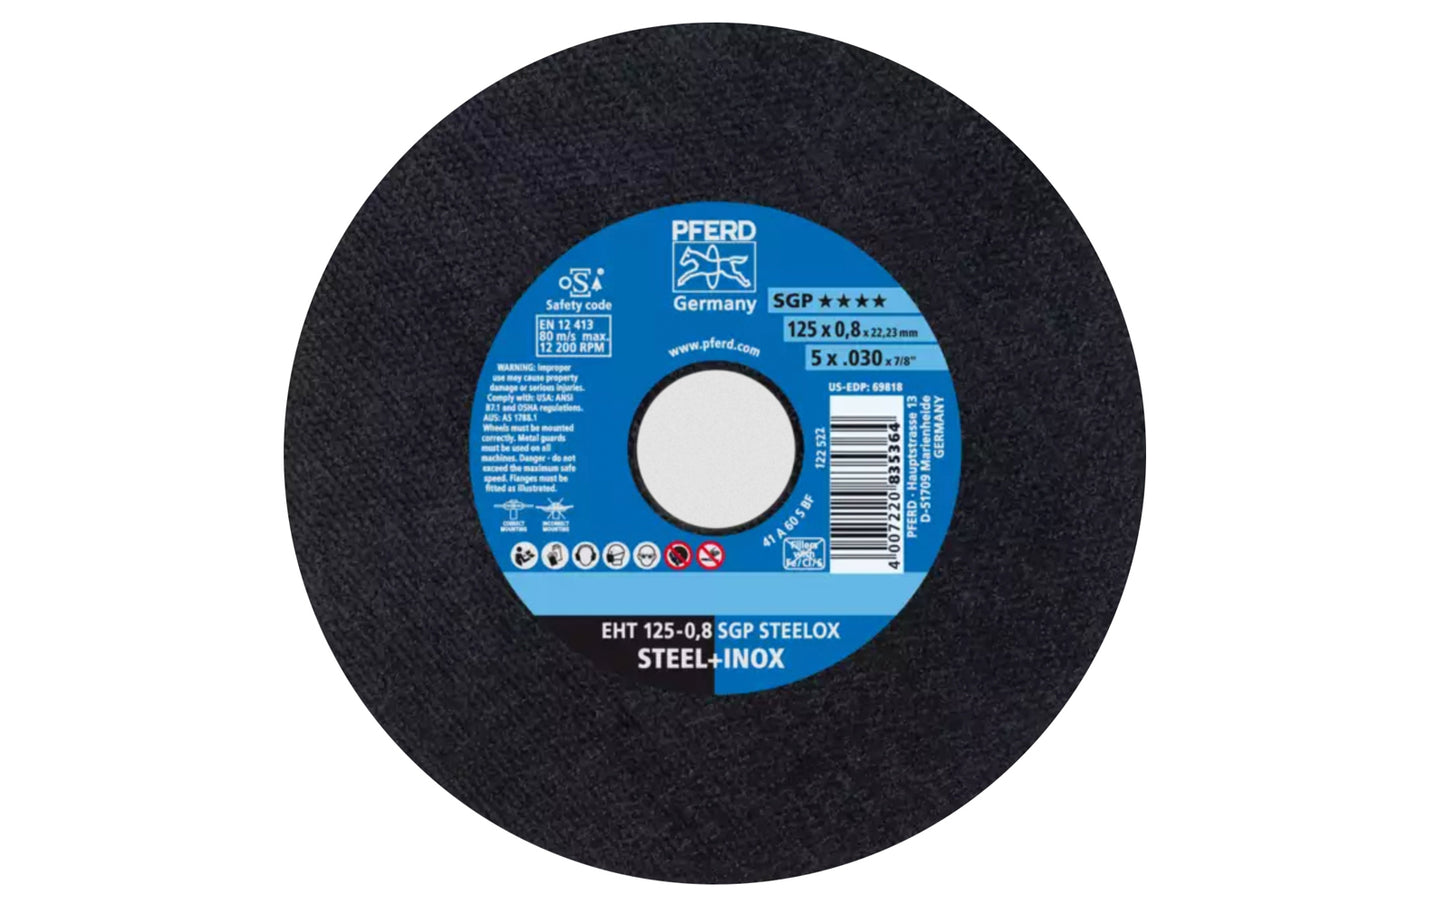 High quality 5" Cut-Off Wheel made by Pferd in Germany. This cut off wheel is designed for steel & stainless steels, cutting of thin sheet metal & profiles, cutting out holes. The cut off disc has fast cutting action. 5" diameter of wheel. 7/8" Arbor. .030" thickness - Extra thin blade. 4007220835364.  Made in Germany.